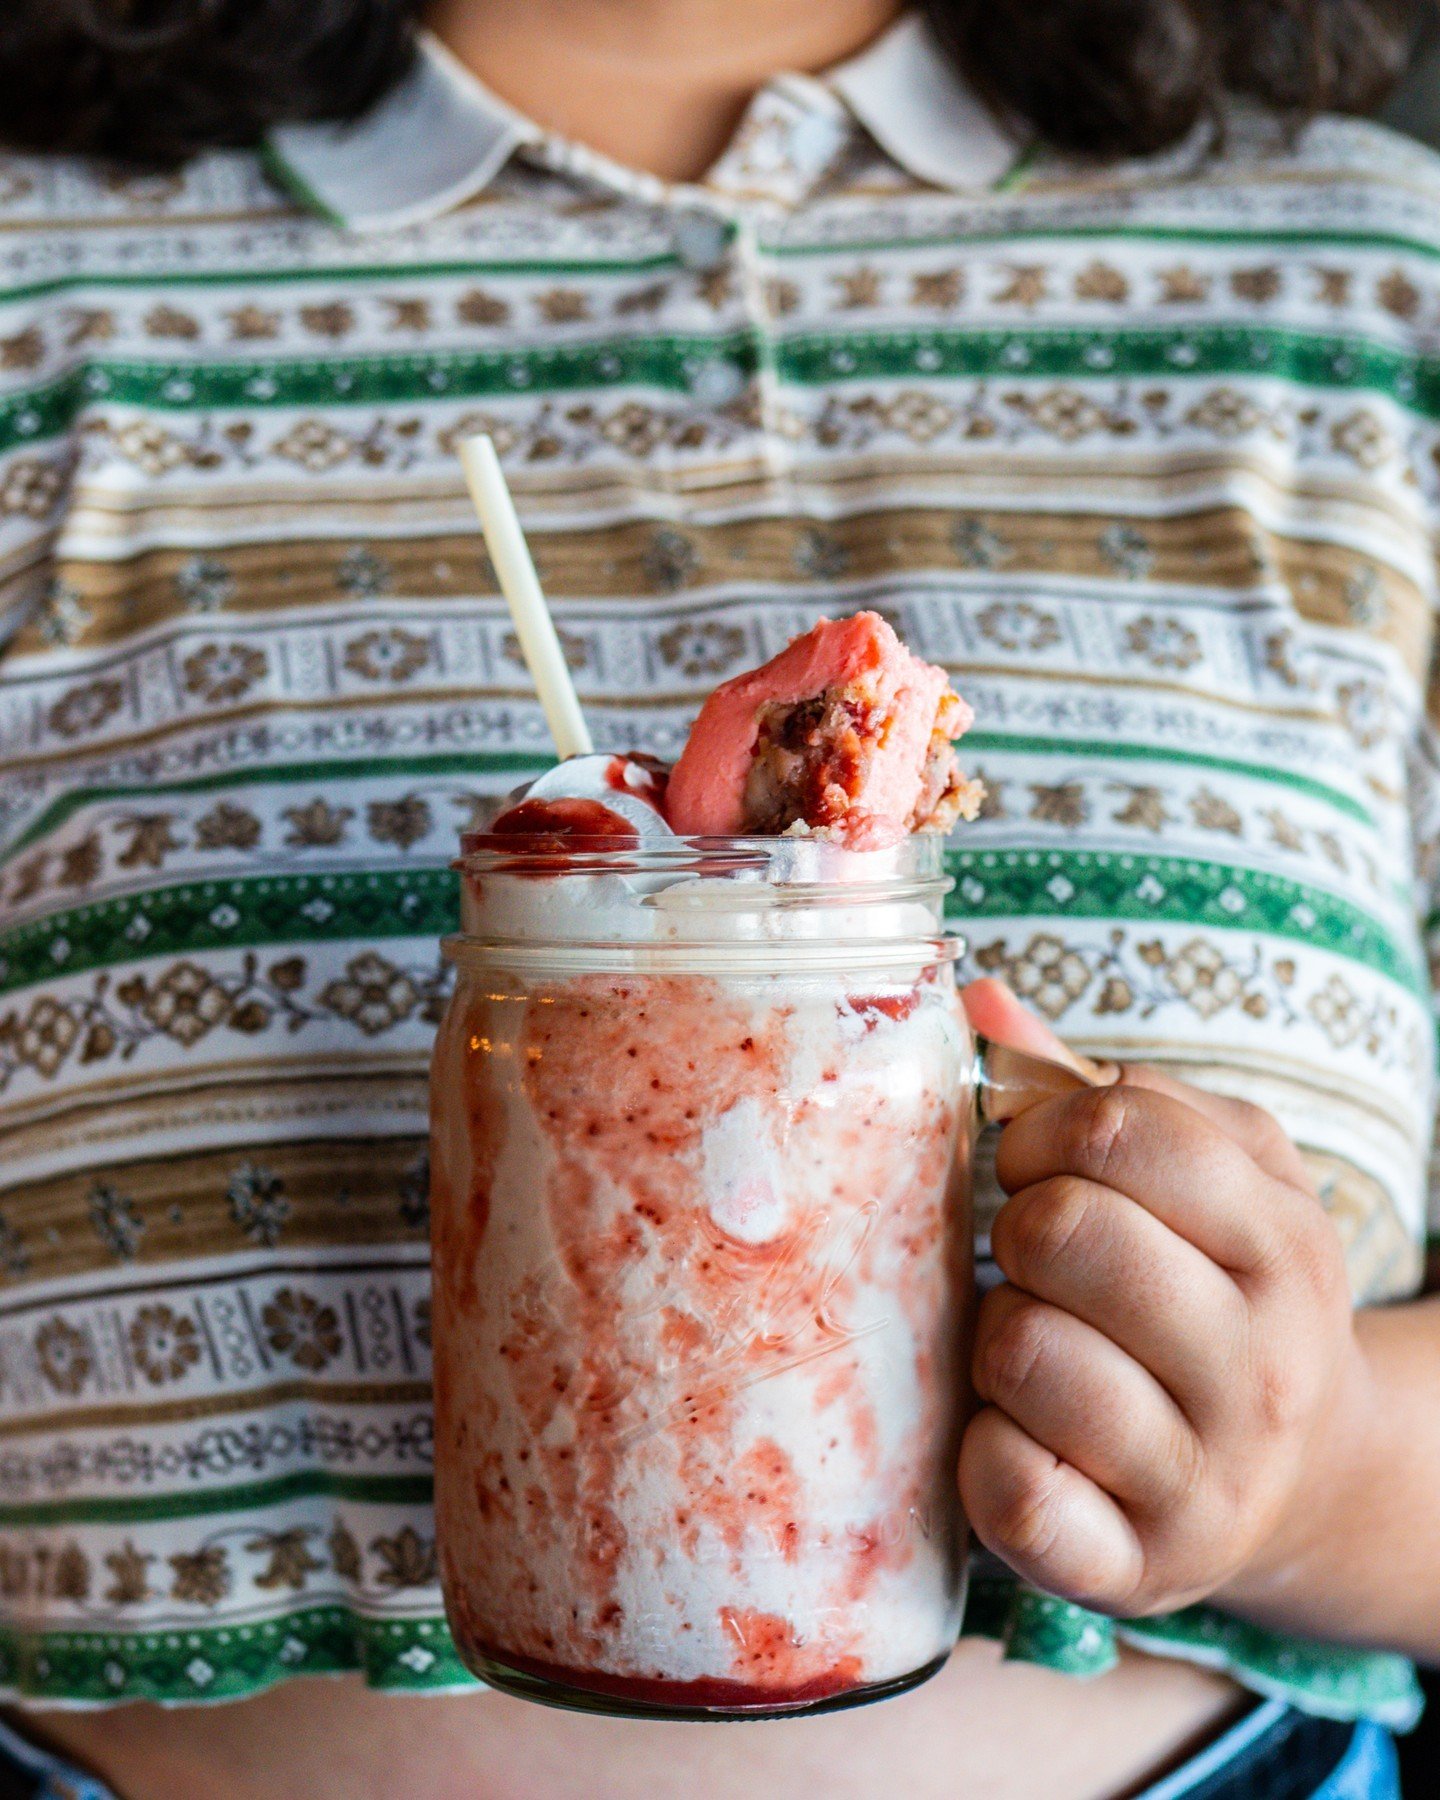 The munchies don't stand a chance against this Diner Favorite &mdash; the Strawberry Cake Shake made with @irenesaustin Strawberry Cake! 🍰✨🍓

#24Diner #IrenesAustin #CultureMapAtx #EatDrinkAustin #DowntownAustin #AtxDesserts #EatMunchies #512Bites